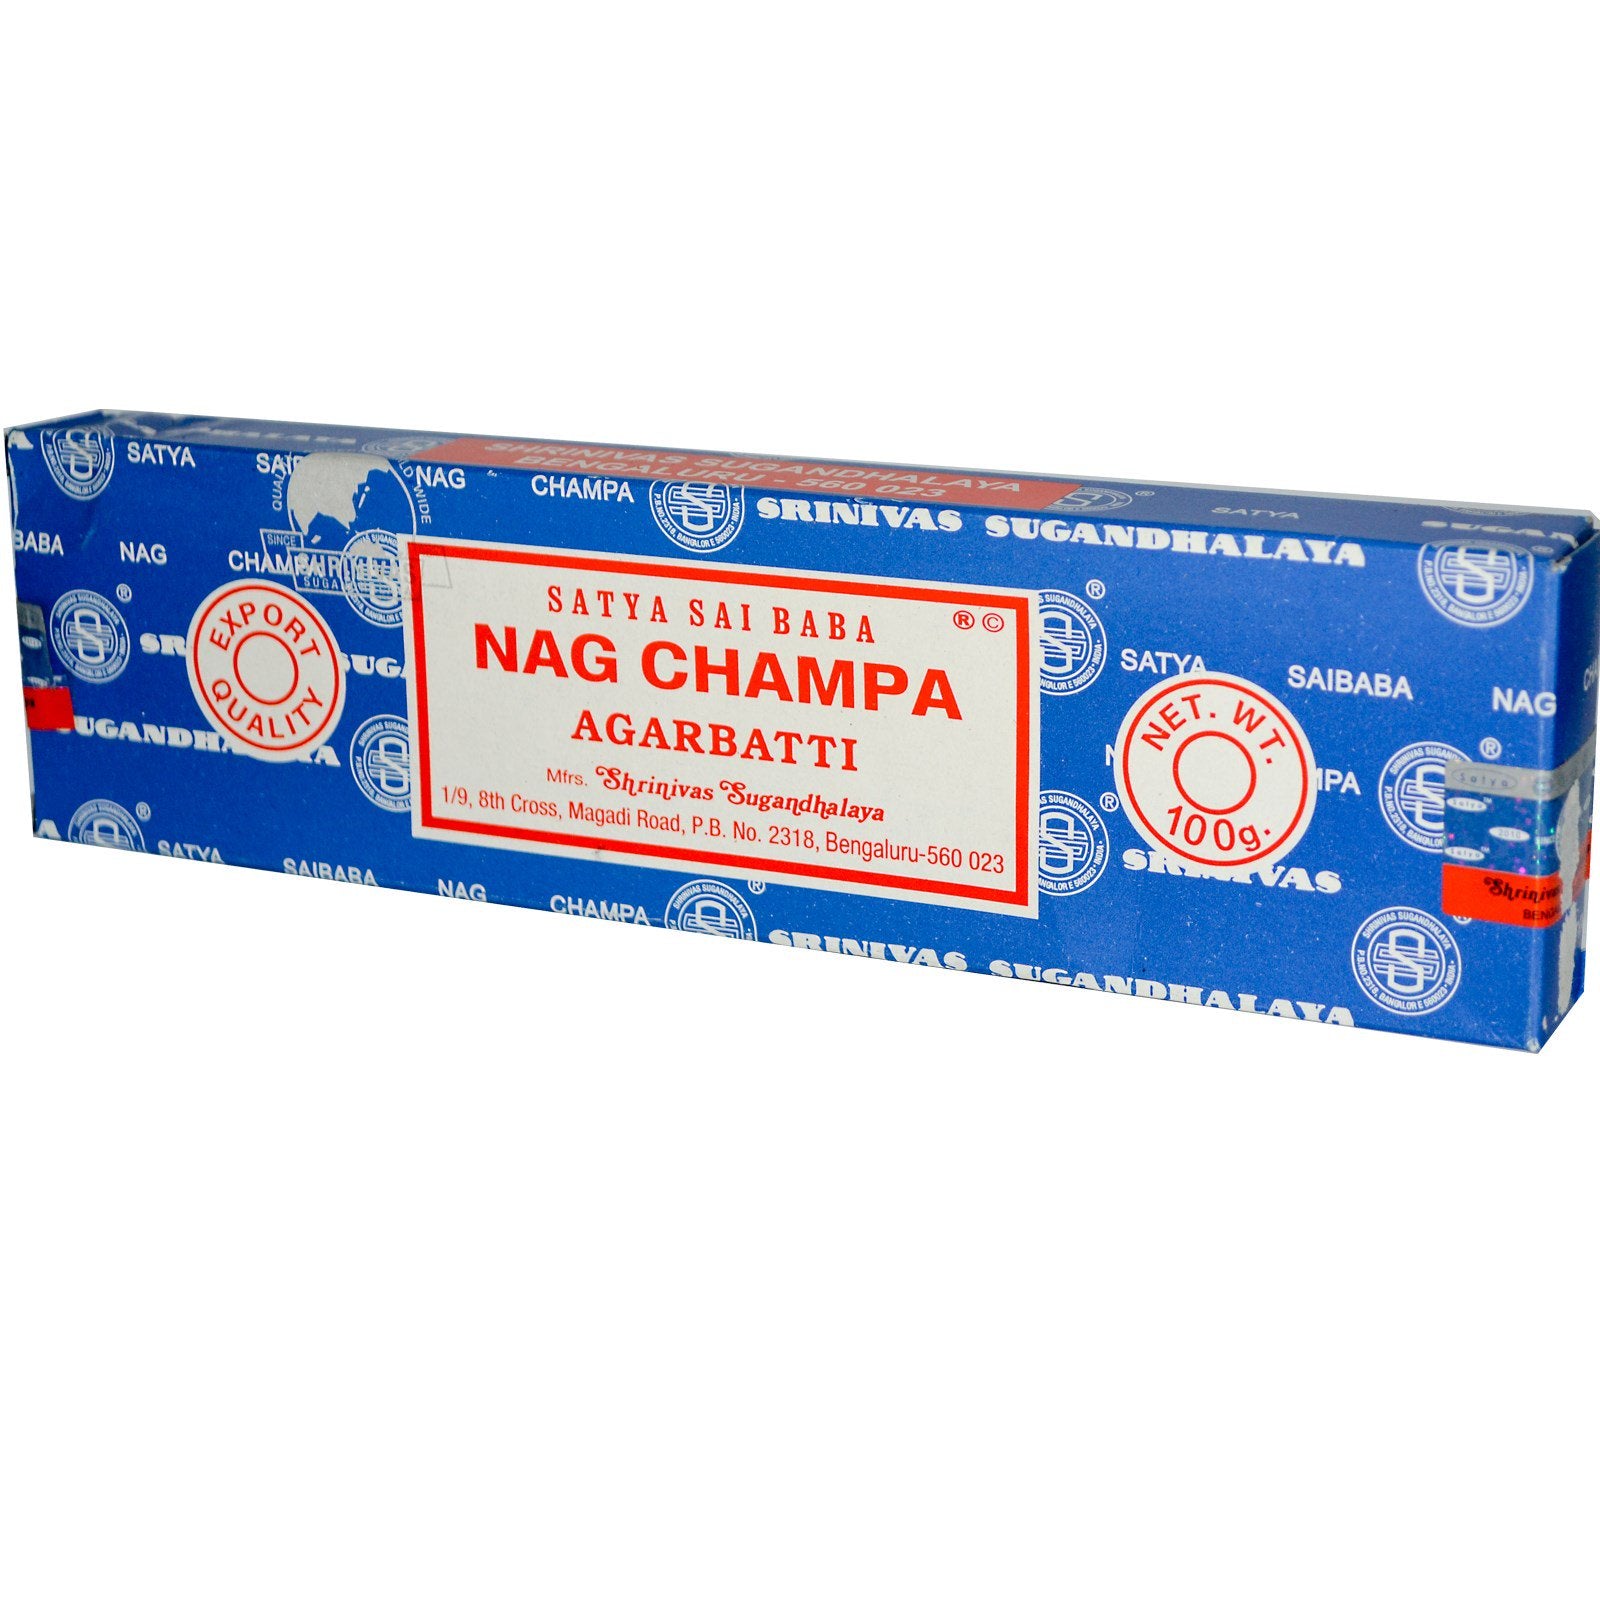 What is Nag Champa?